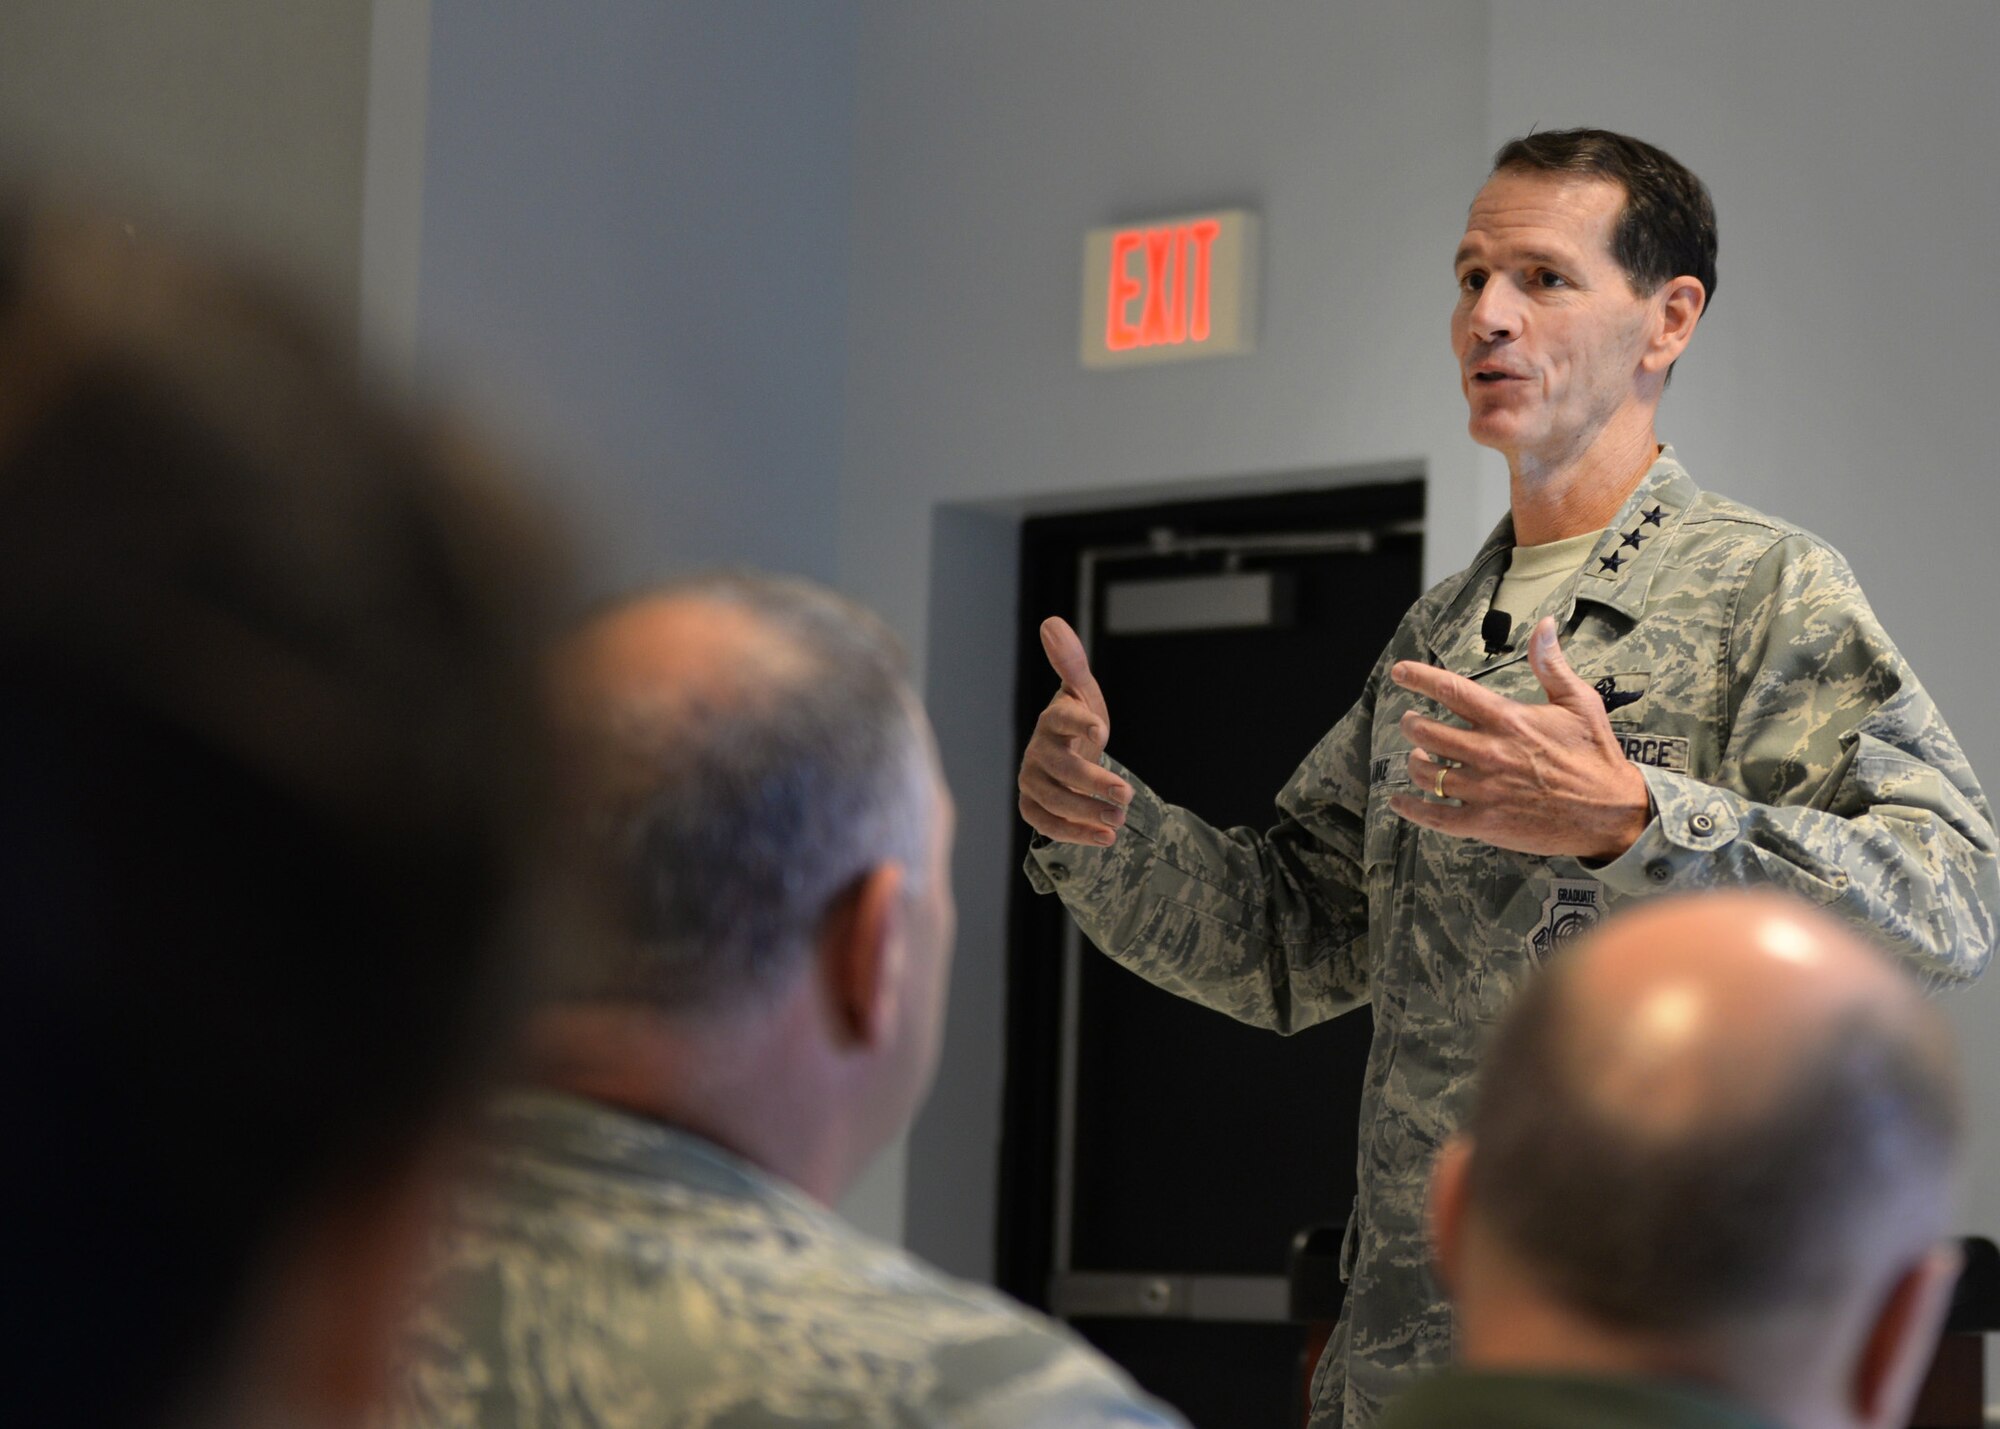 Lt. Gen. Stanley E. “Sid” Clarke III, the director of the Air National Guard, speaks with members of the 157th Air Refueling Wing during an all-call at Pease Air National Guard Base, New Hampshire, Oct. 15. Clarke said during the all-call that he believes the Air Force selected the right organization to lead the Air National Guard through the transition of the KC-135 to the KC-46A Pegasus air refueling aircraft. The new weapon system is expected to arrive at Pease in 2018. (U.S. Air National Guard photo by Senior Airman Kayla Rorick)